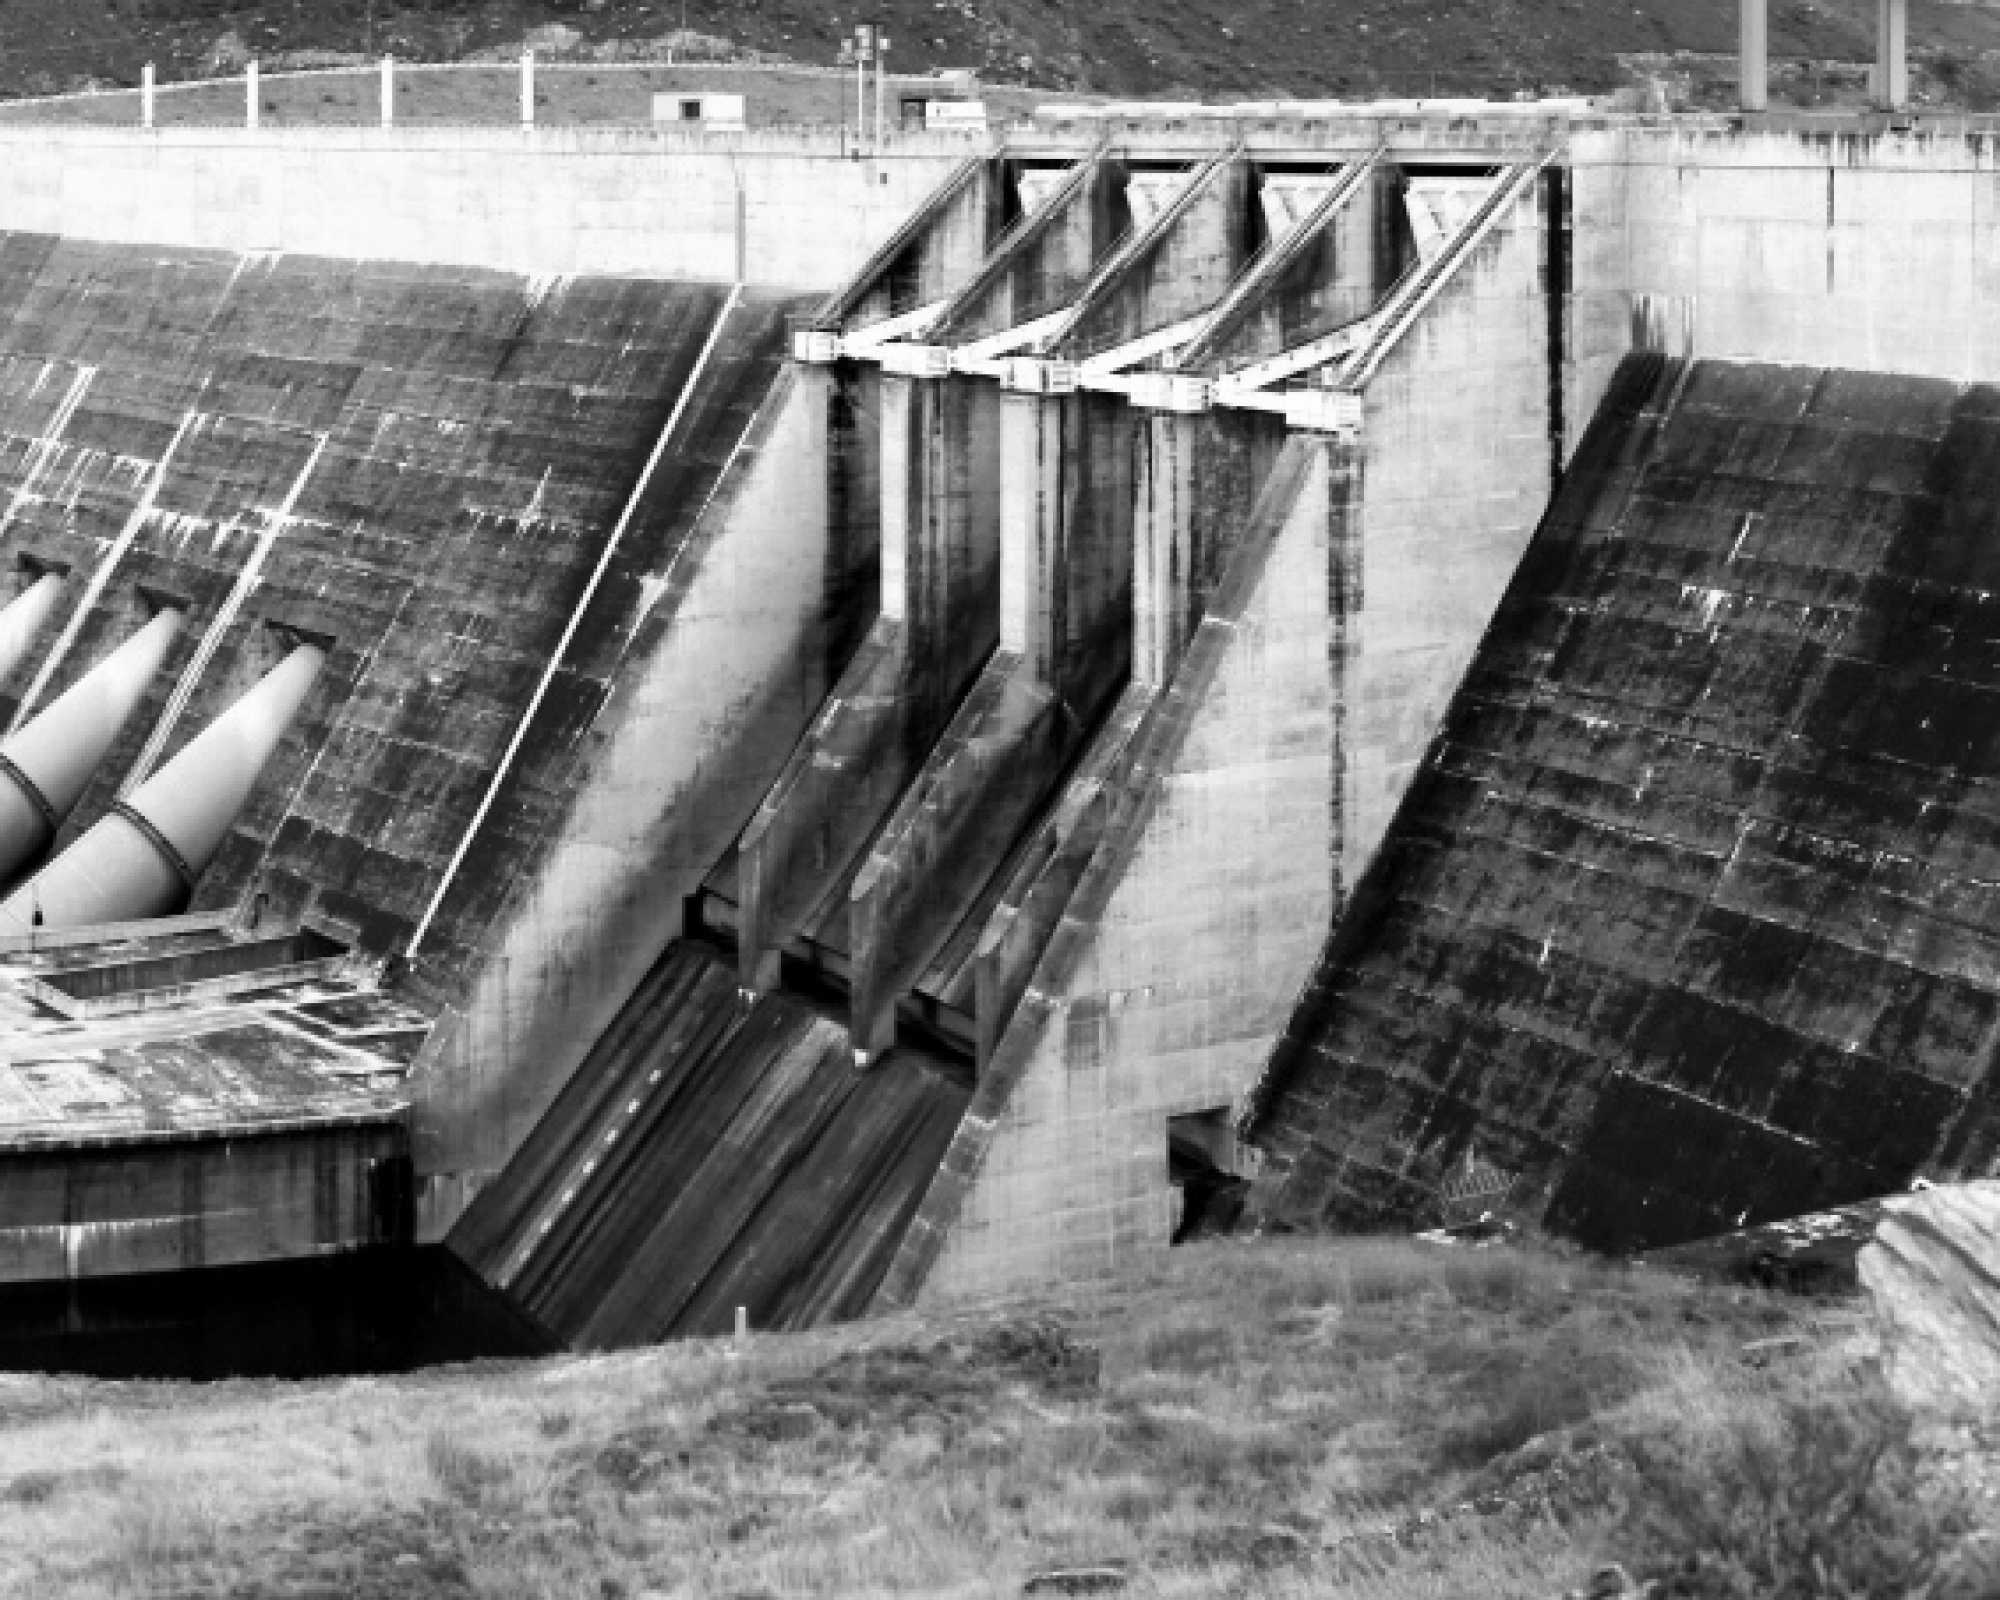 Clyde Dam in the South Island